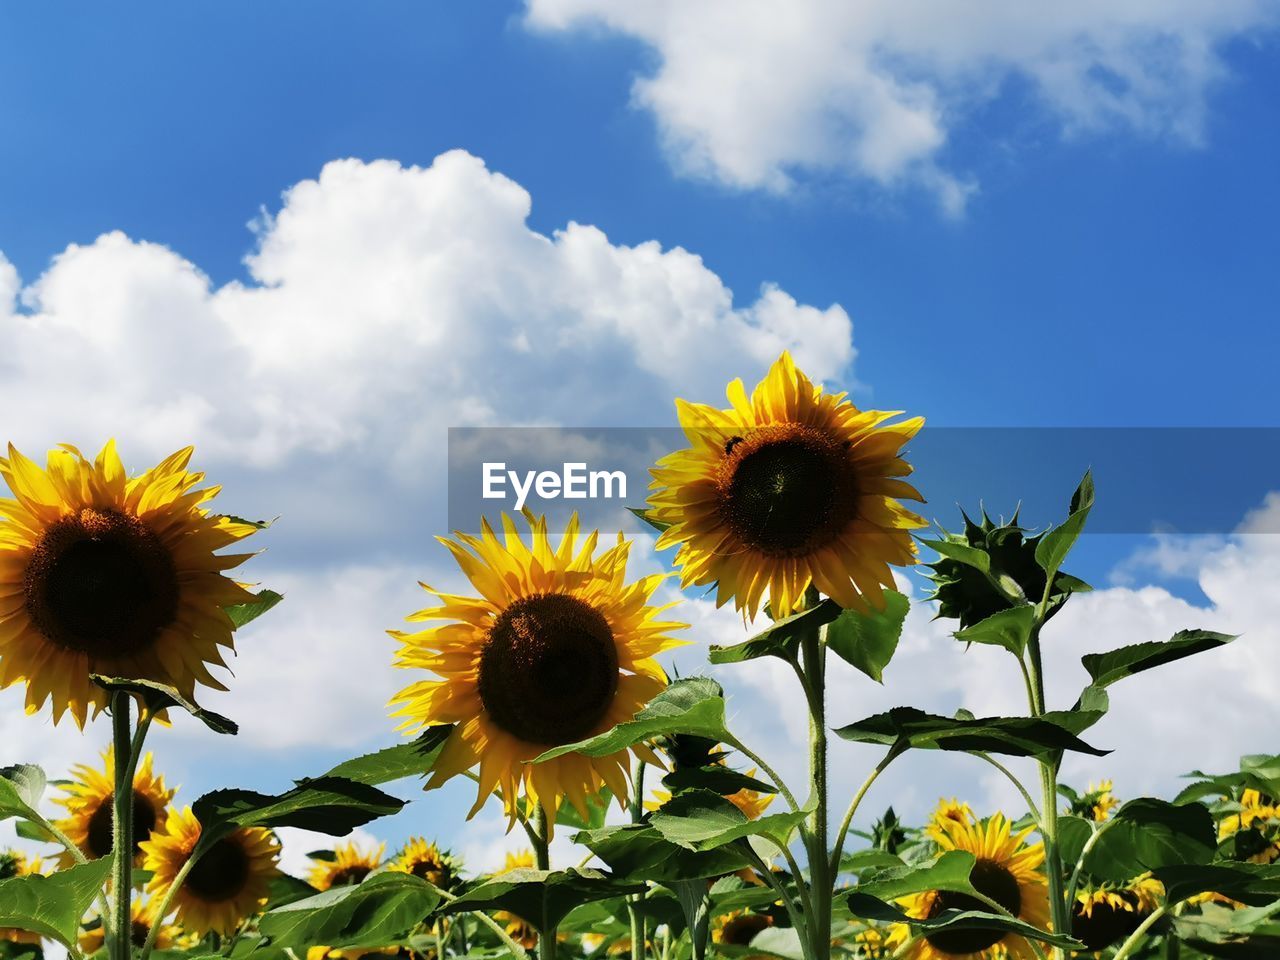 CLOSE-UP OF YELLOW FLOWERING PLANTS AGAINST SKY